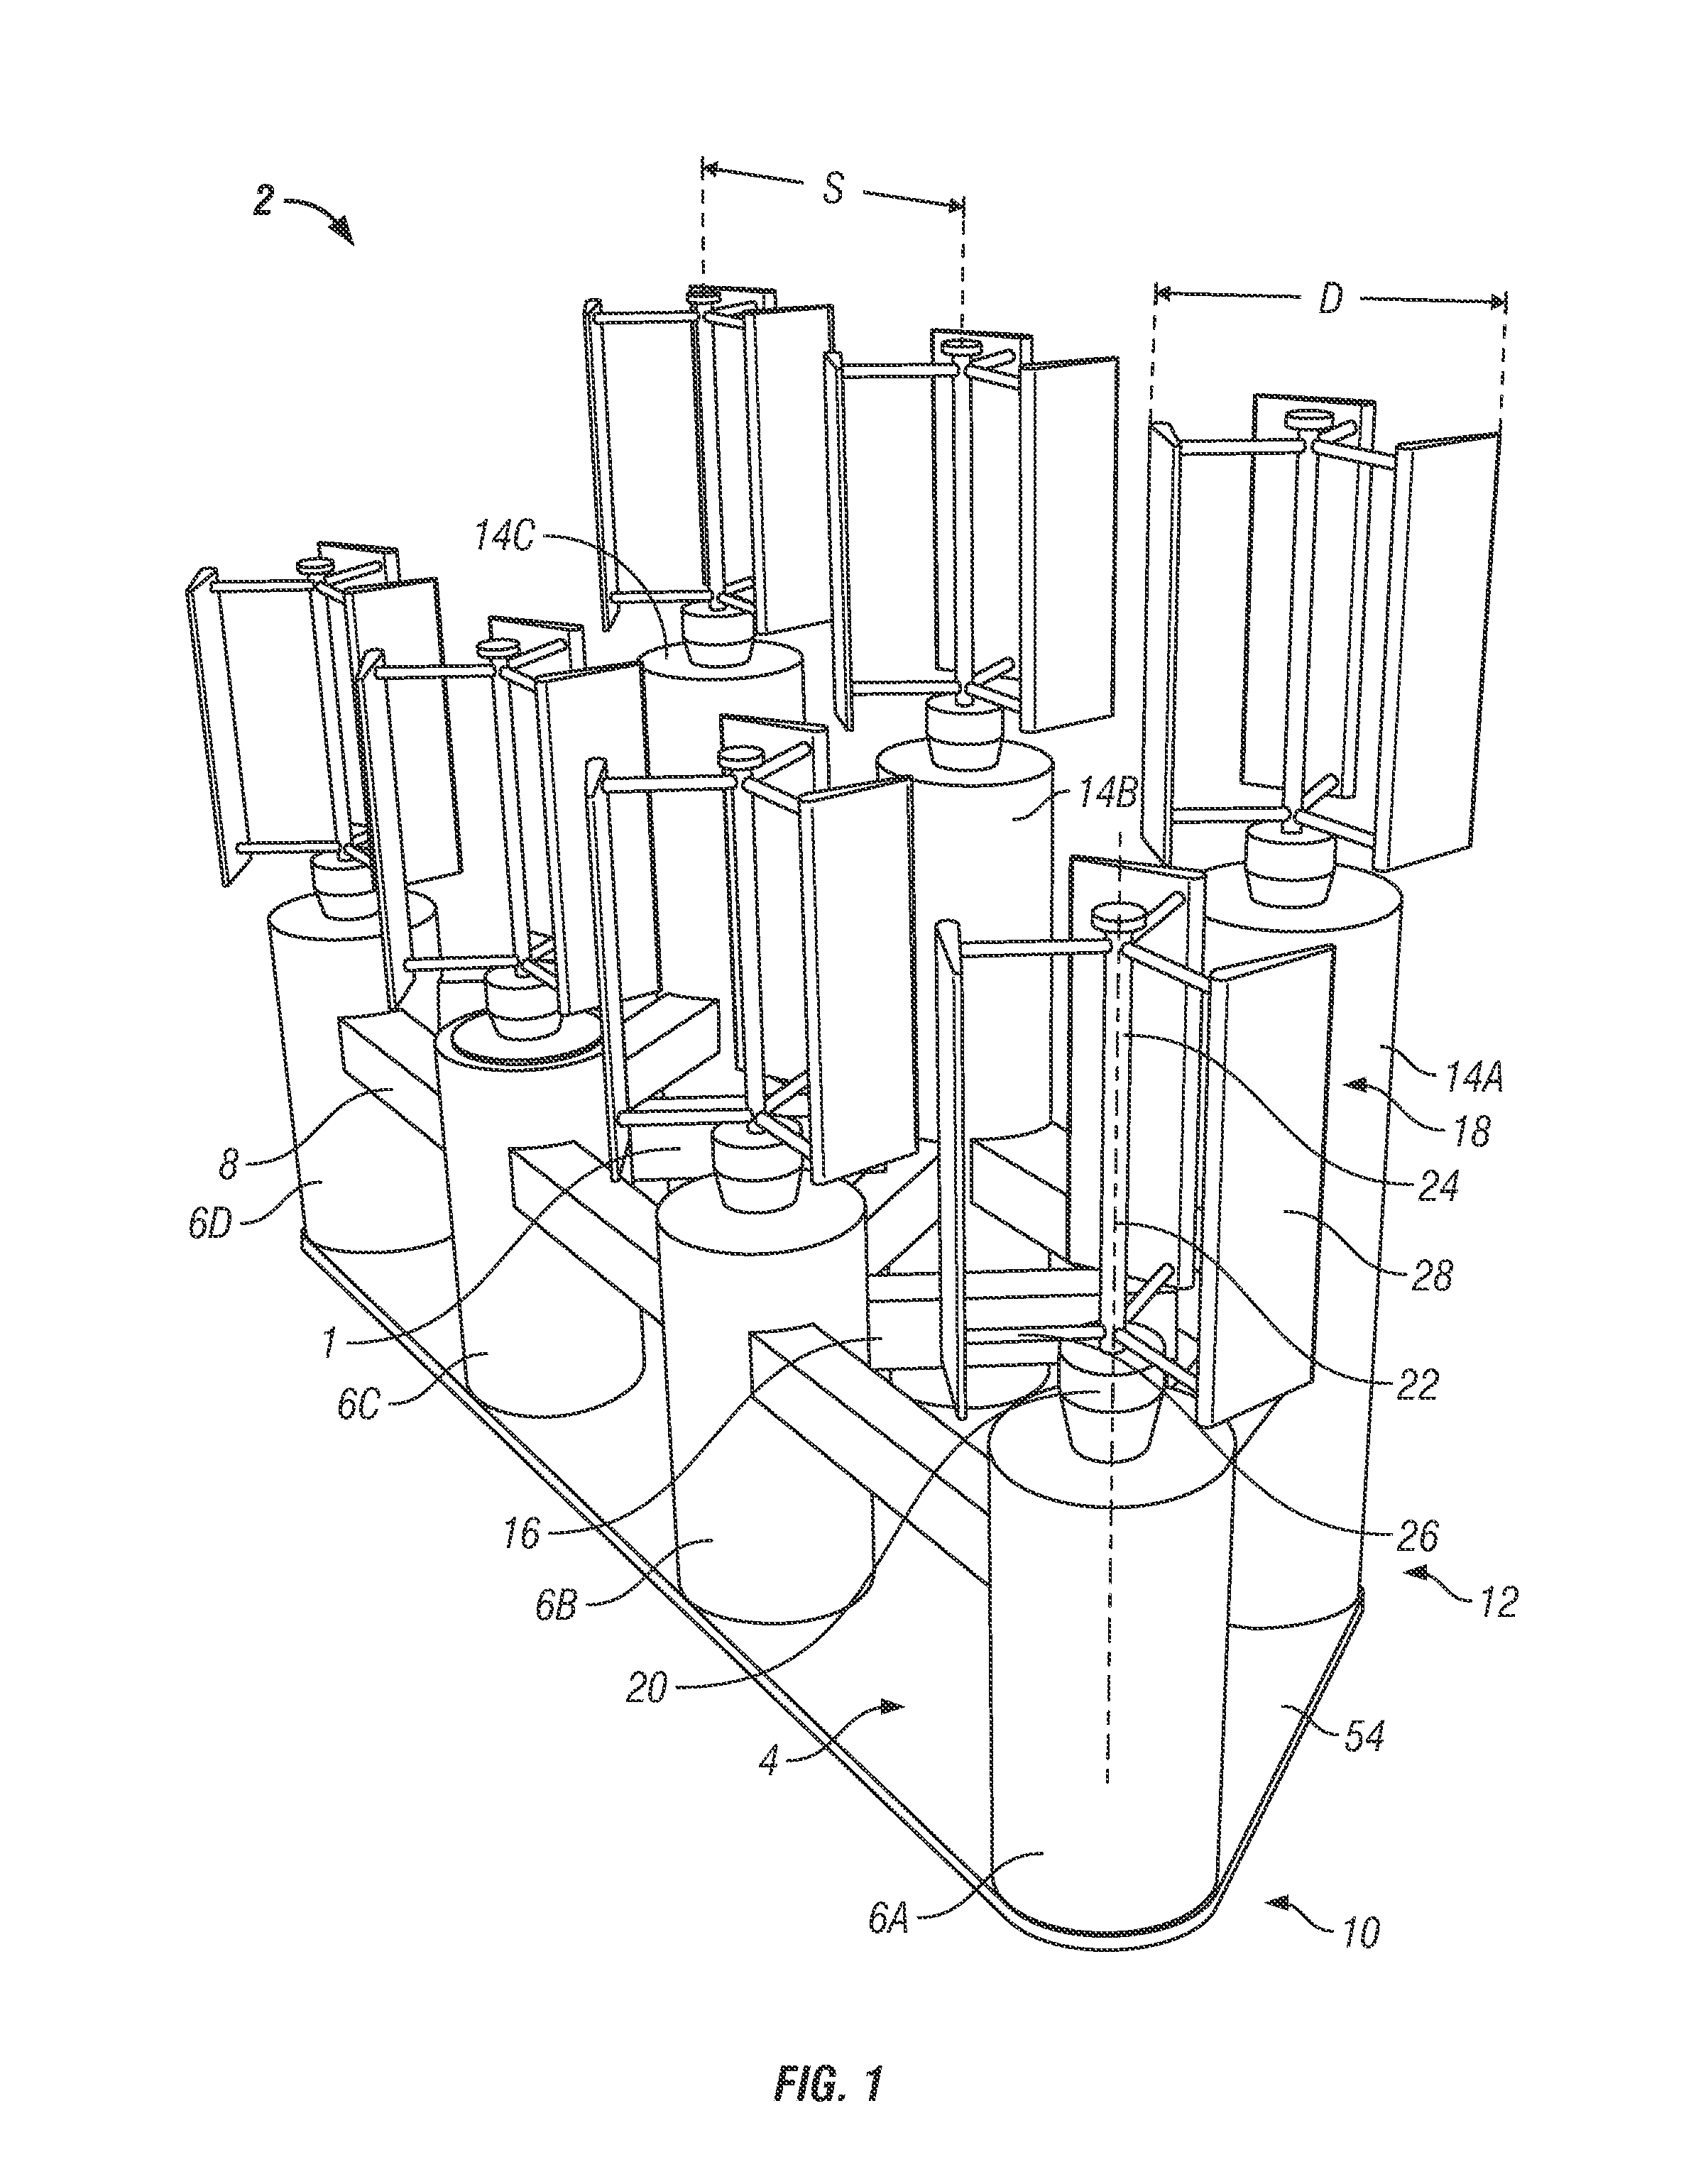 Floating vertical axis wind turbine module system and method